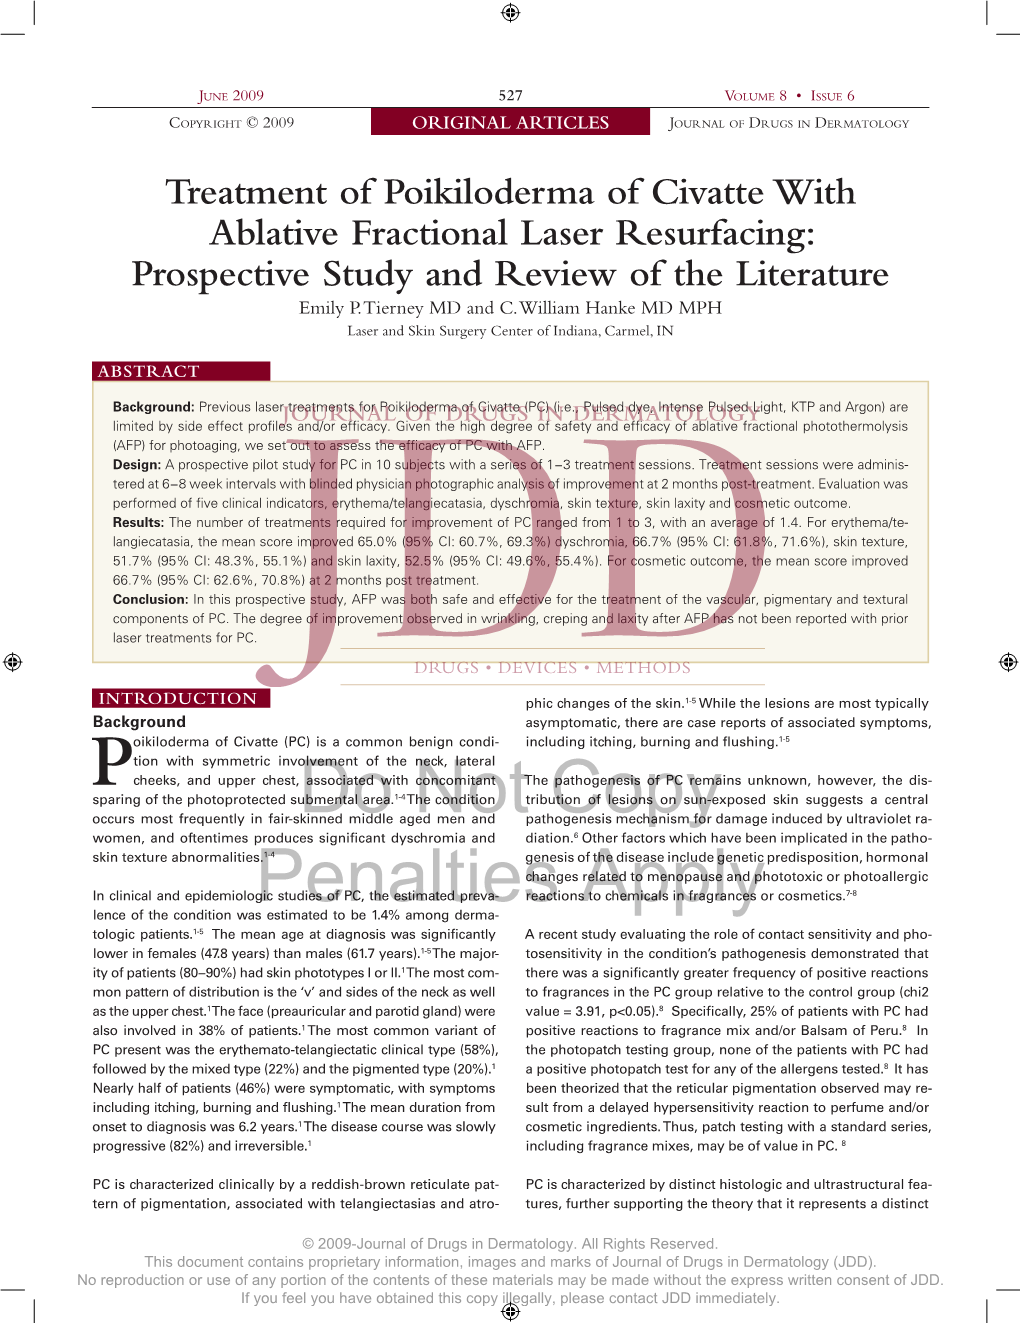 Treatment of Poikiloderma of Civatte with Ablative Fractional Laser Resurfacing: Prospective Study and Review of the Literature Emily P